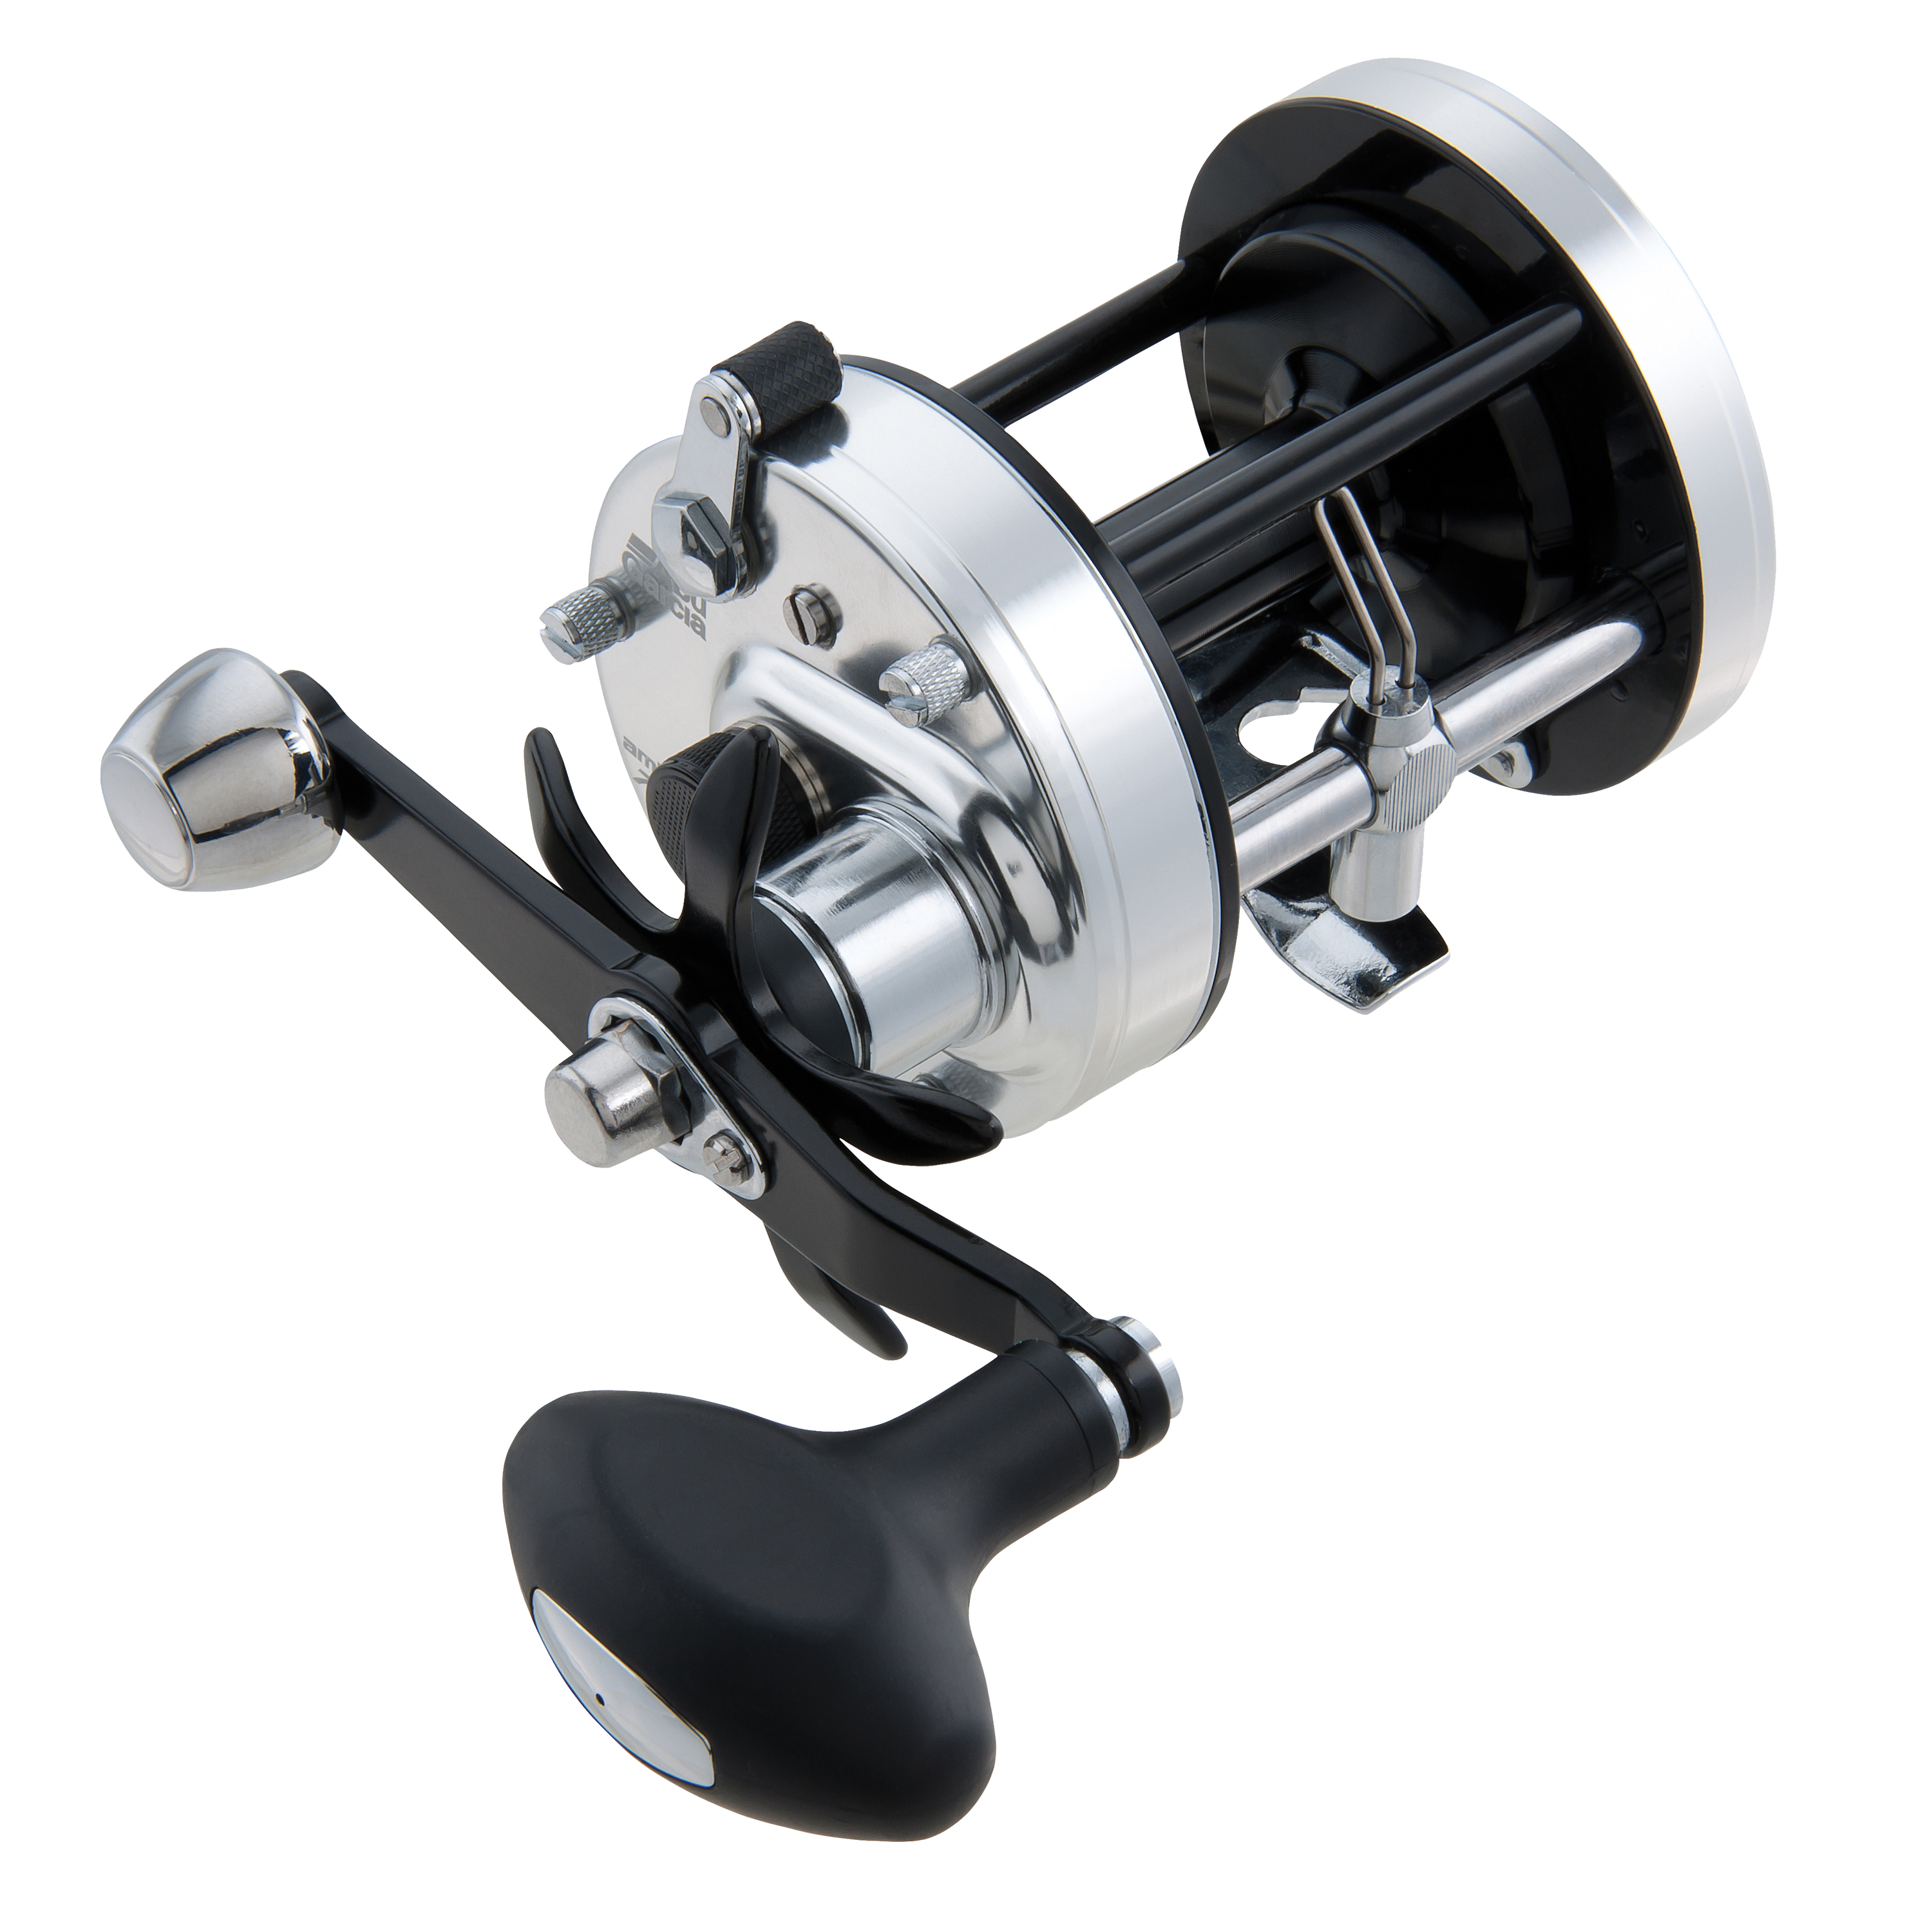 Abu Garcia C3-7000 AMB BCAST C3 REEL 1324531 with Free S&H — CampSaver